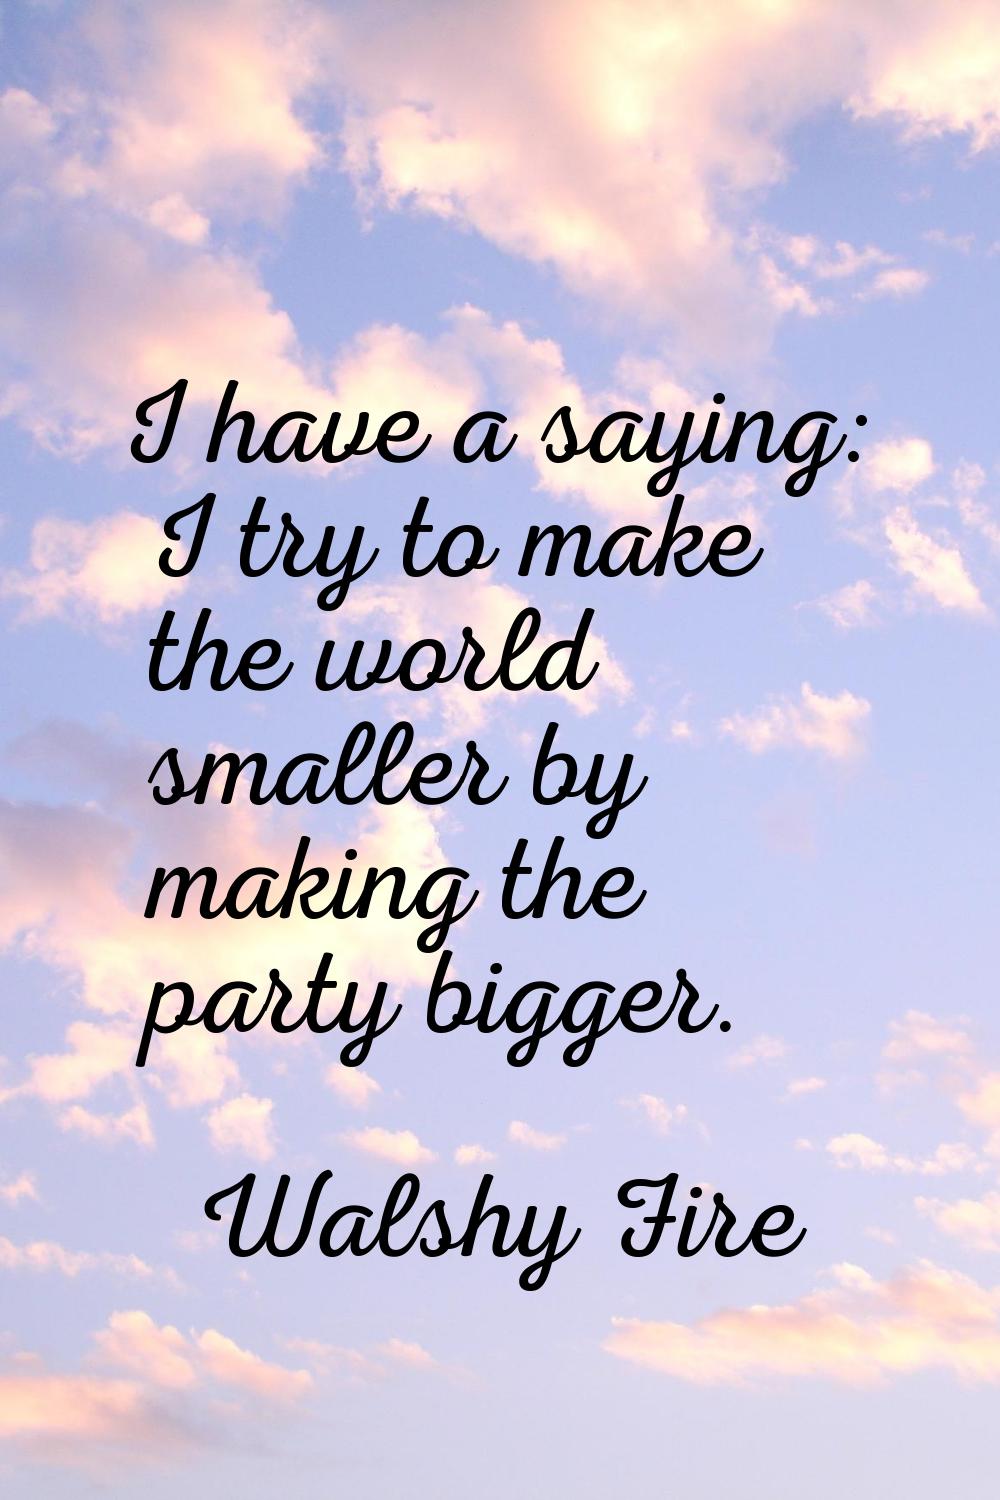 I have a saying: I try to make the world smaller by making the party bigger.